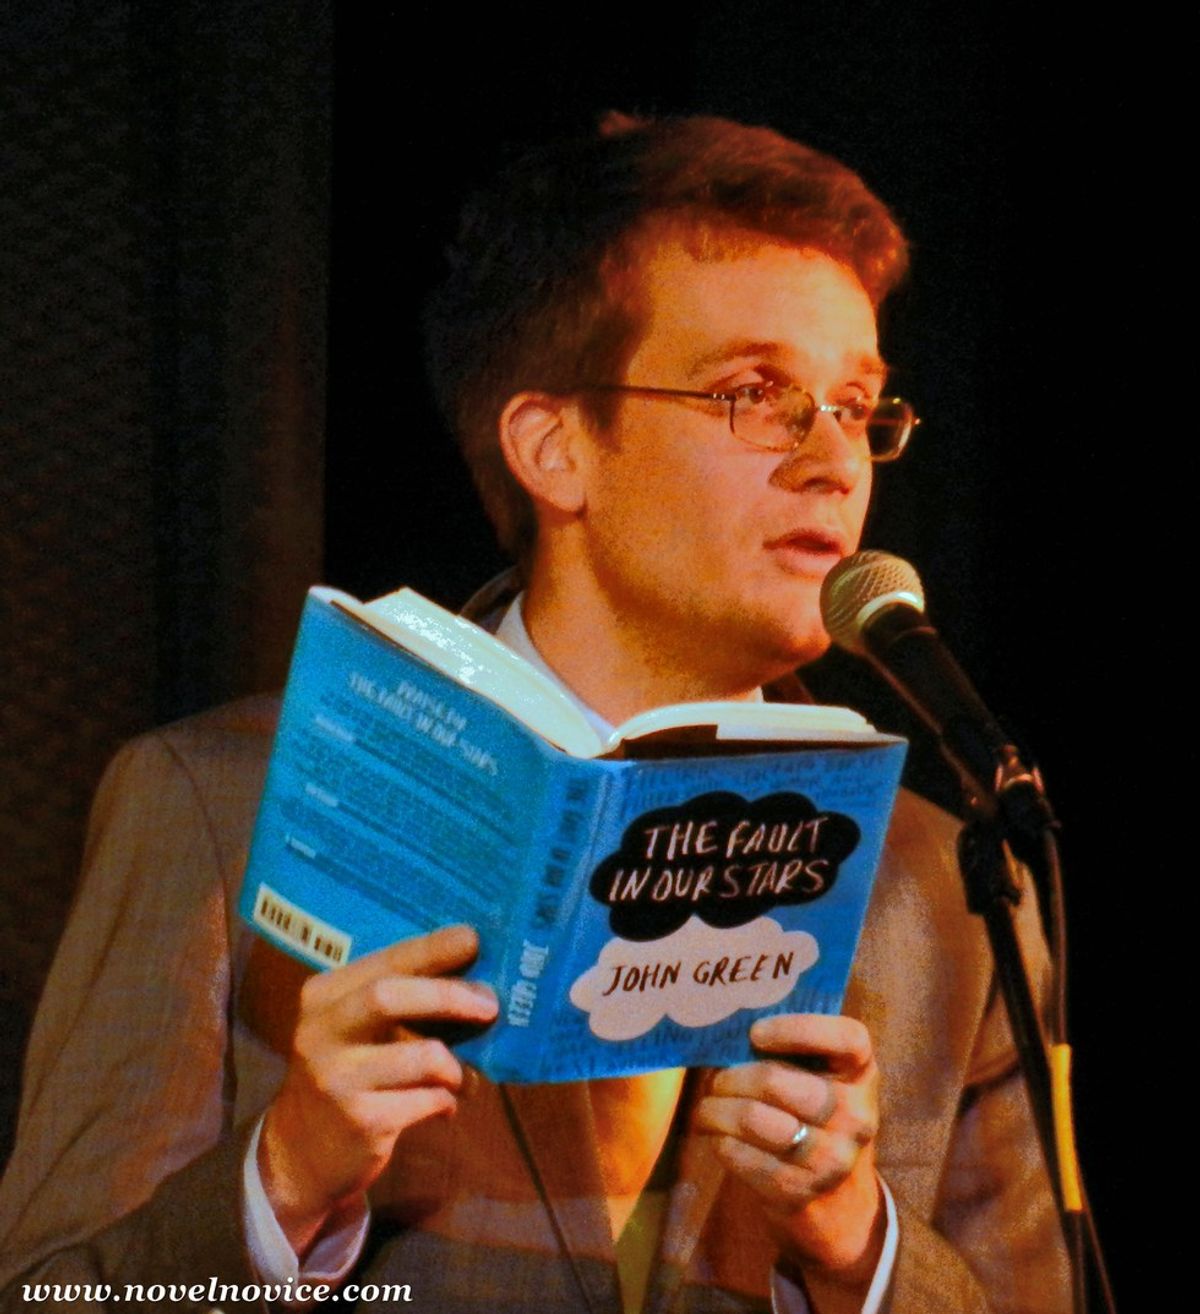 Why People Of All Ages Should Read John Green's Books